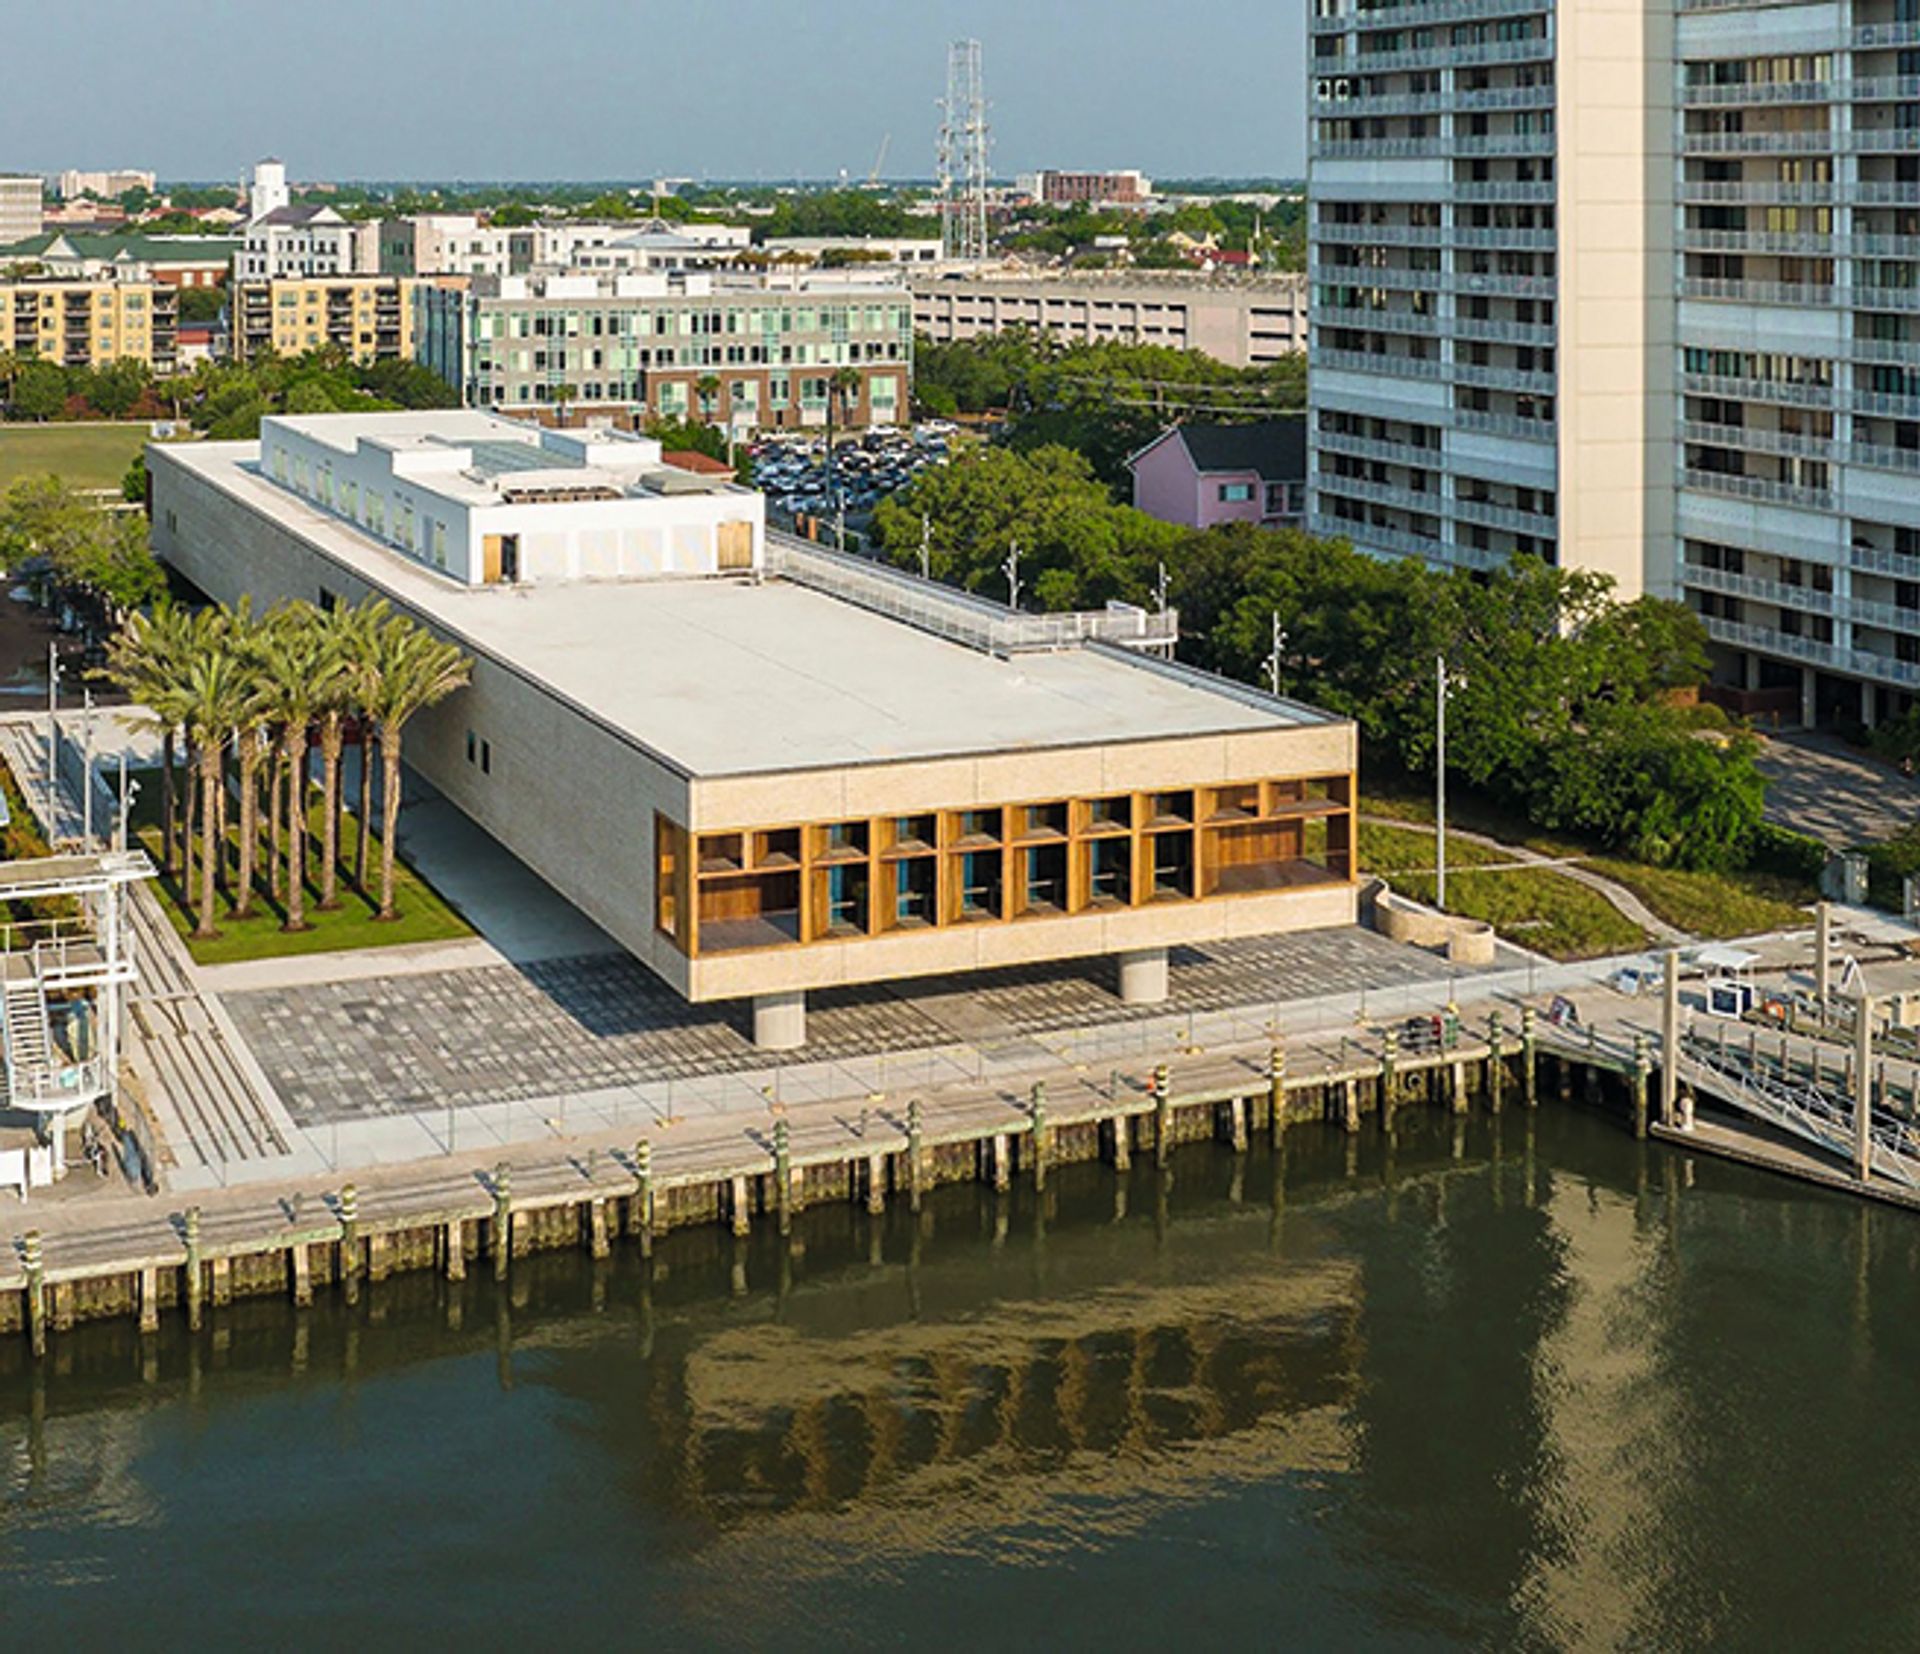 The new International African American Museum sits on Gadsden’s Wharf, where 100,000 slaves entered the US Courtesy of the Museum